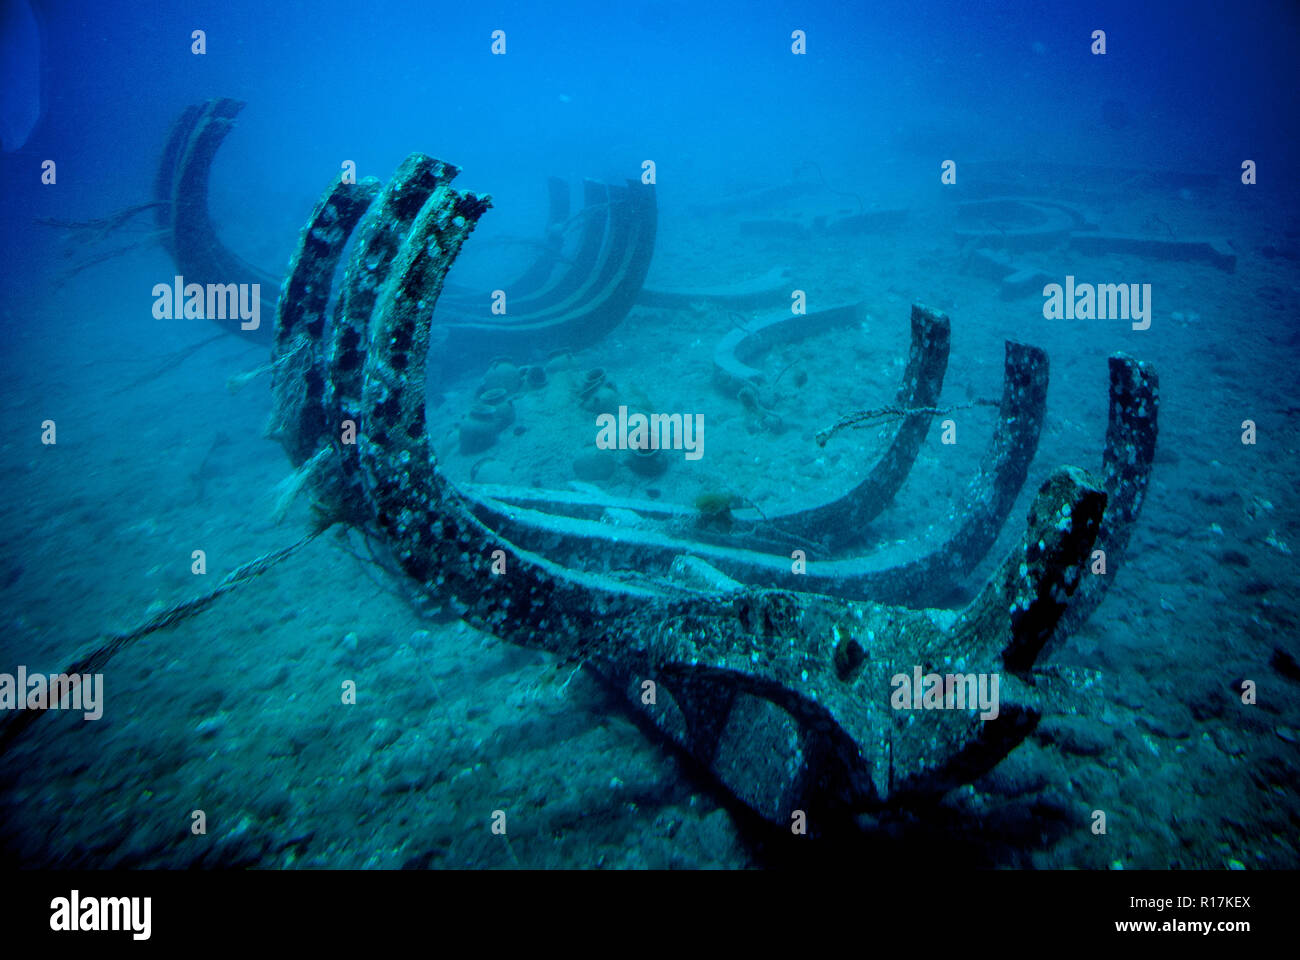 Pieces of ship wreck laying on the ground of the ocean in the blue water Stock Photo